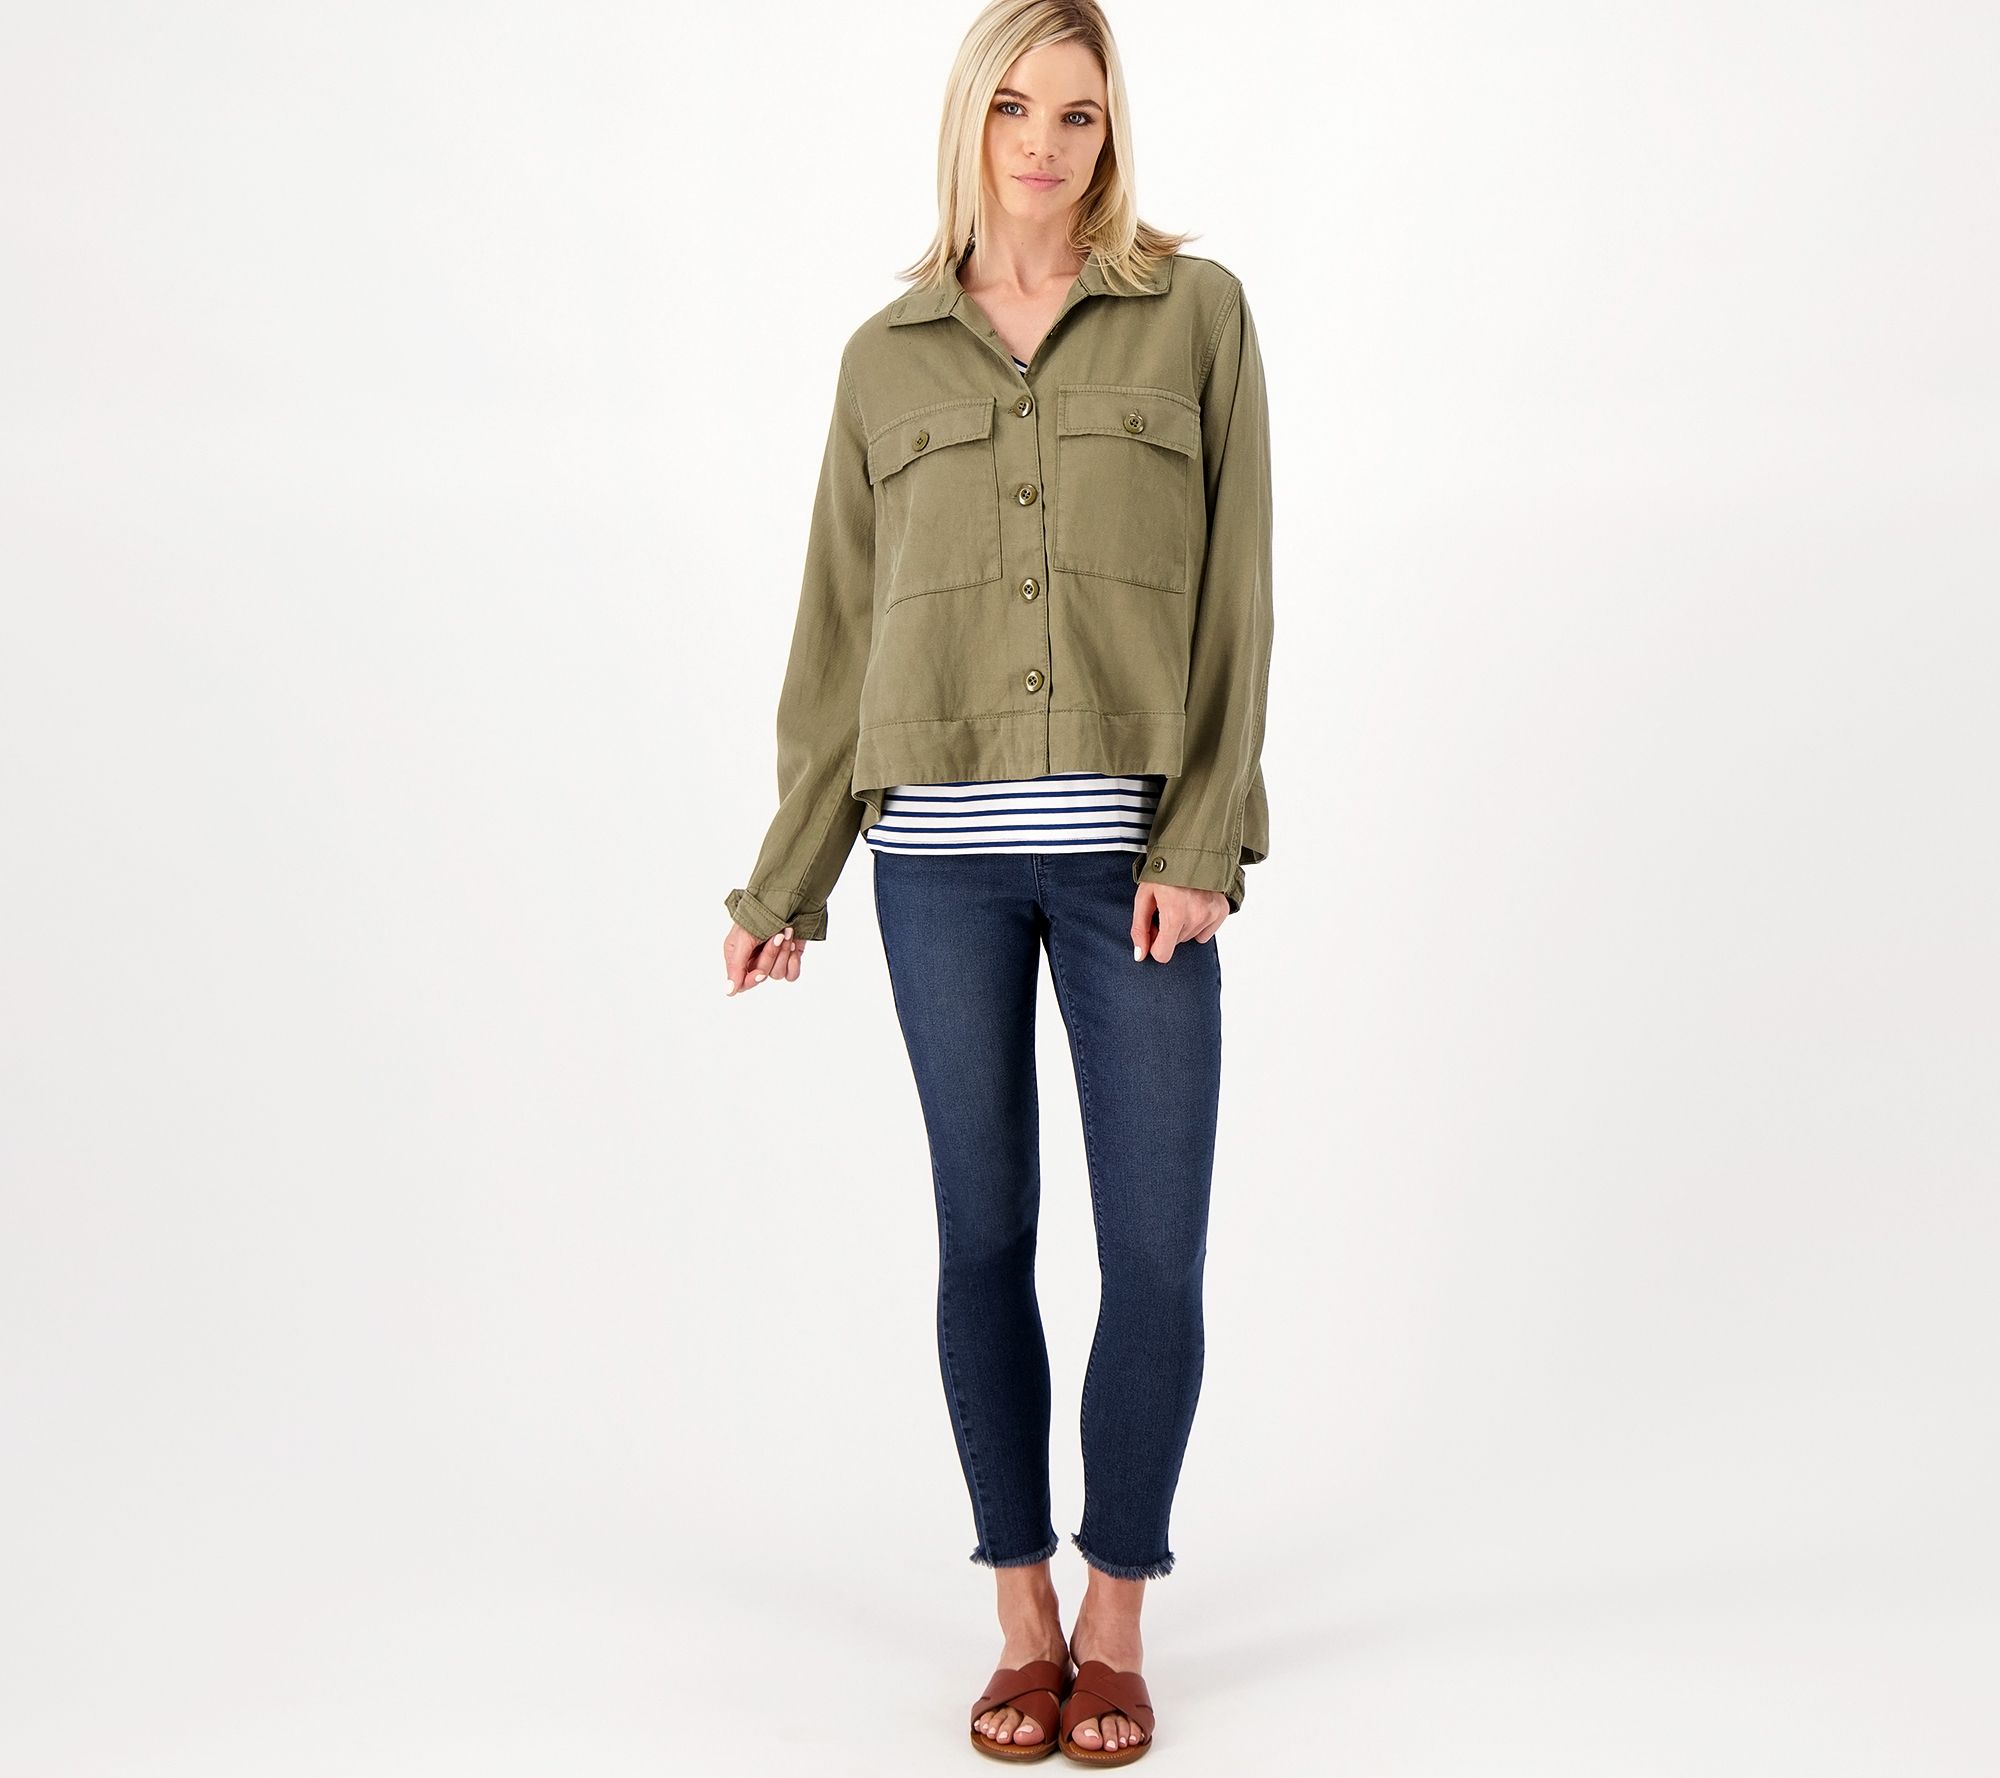 As Is Laurie Felt Utility Shirt Jacket